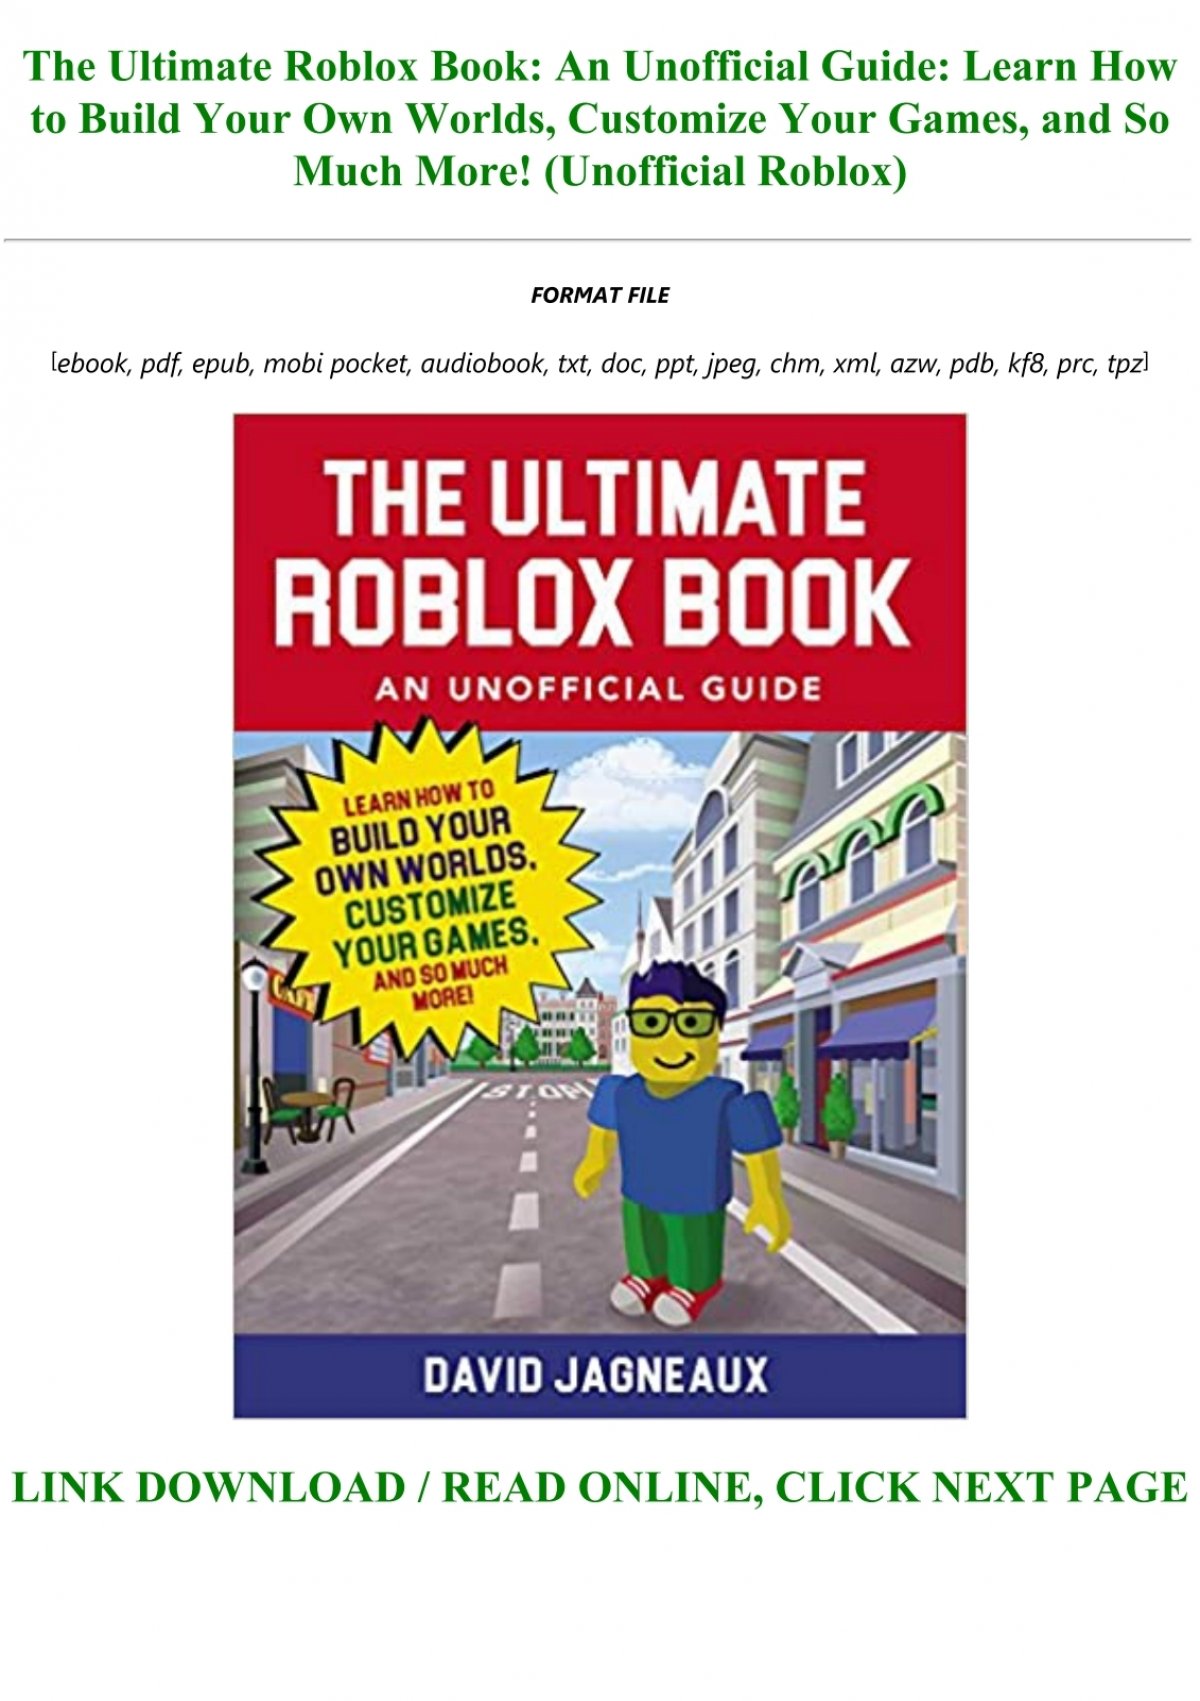 P D F Download The Ultimate Roblox Book An Unofficial Guide Learn How To Build Your Own Worlds Customize Your Games And So Much More Unofficial Roblox Full Pdf - best seller the ultimate guide an unofficial roblox game guide e book